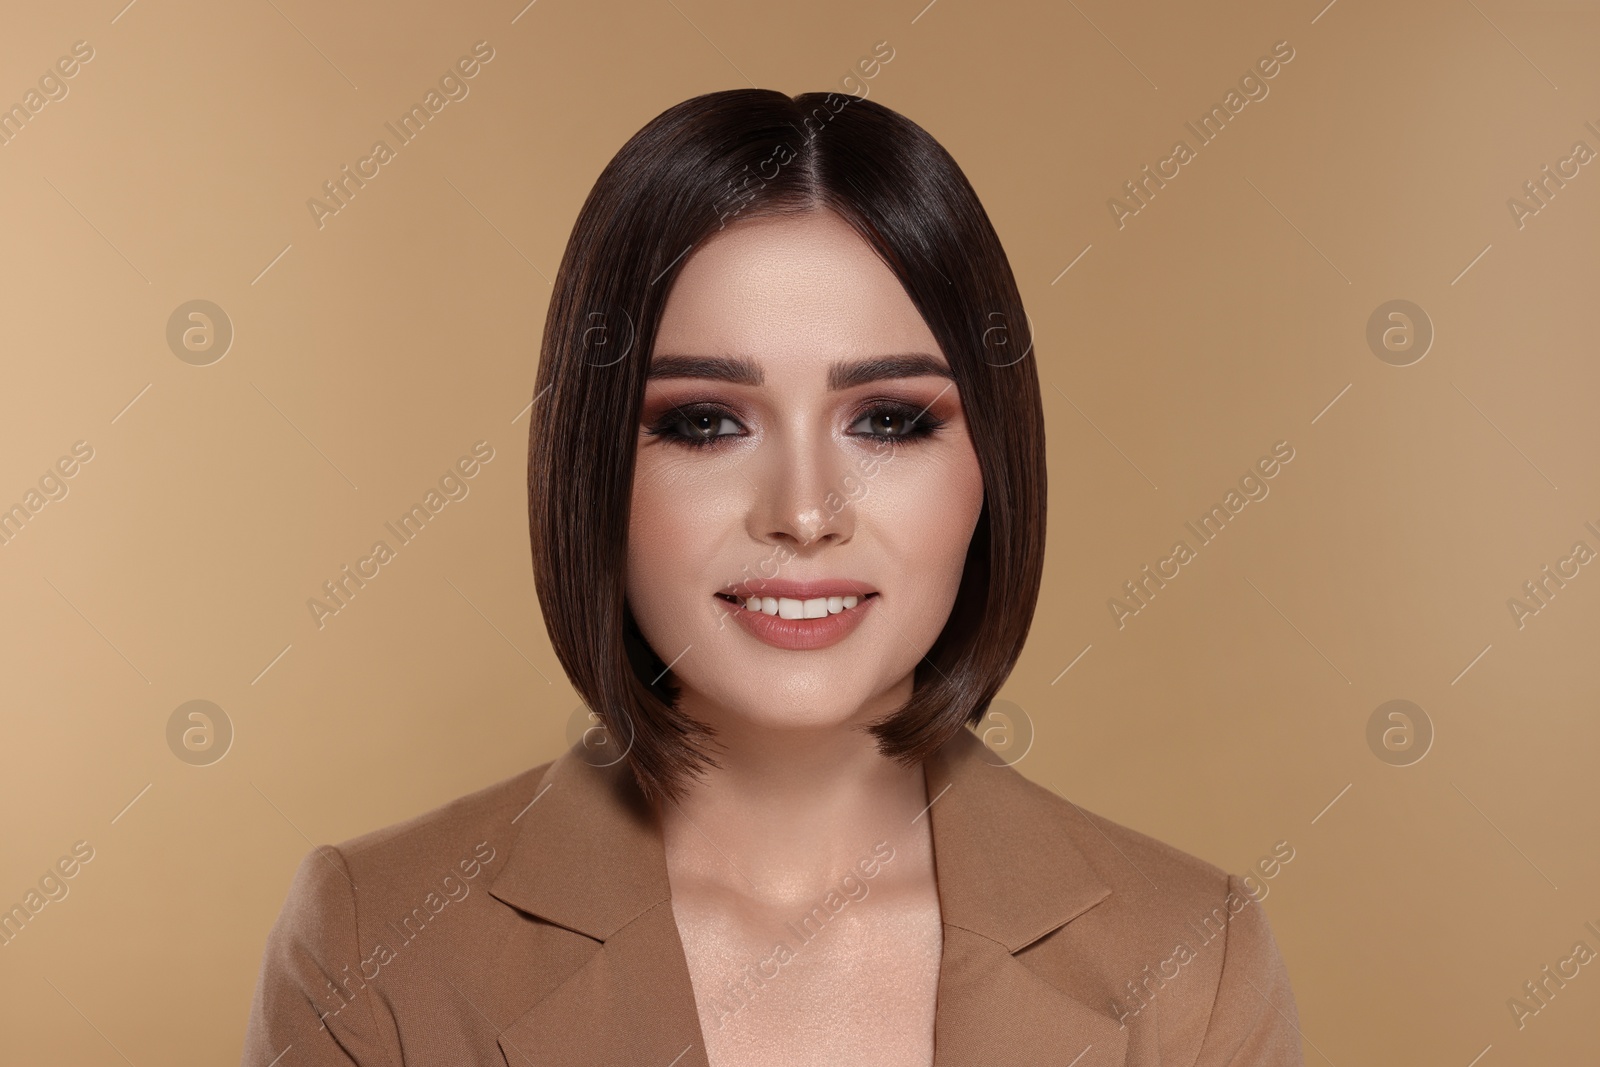 Image of Portrait of stylish young woman with brown hair smiling on beige background